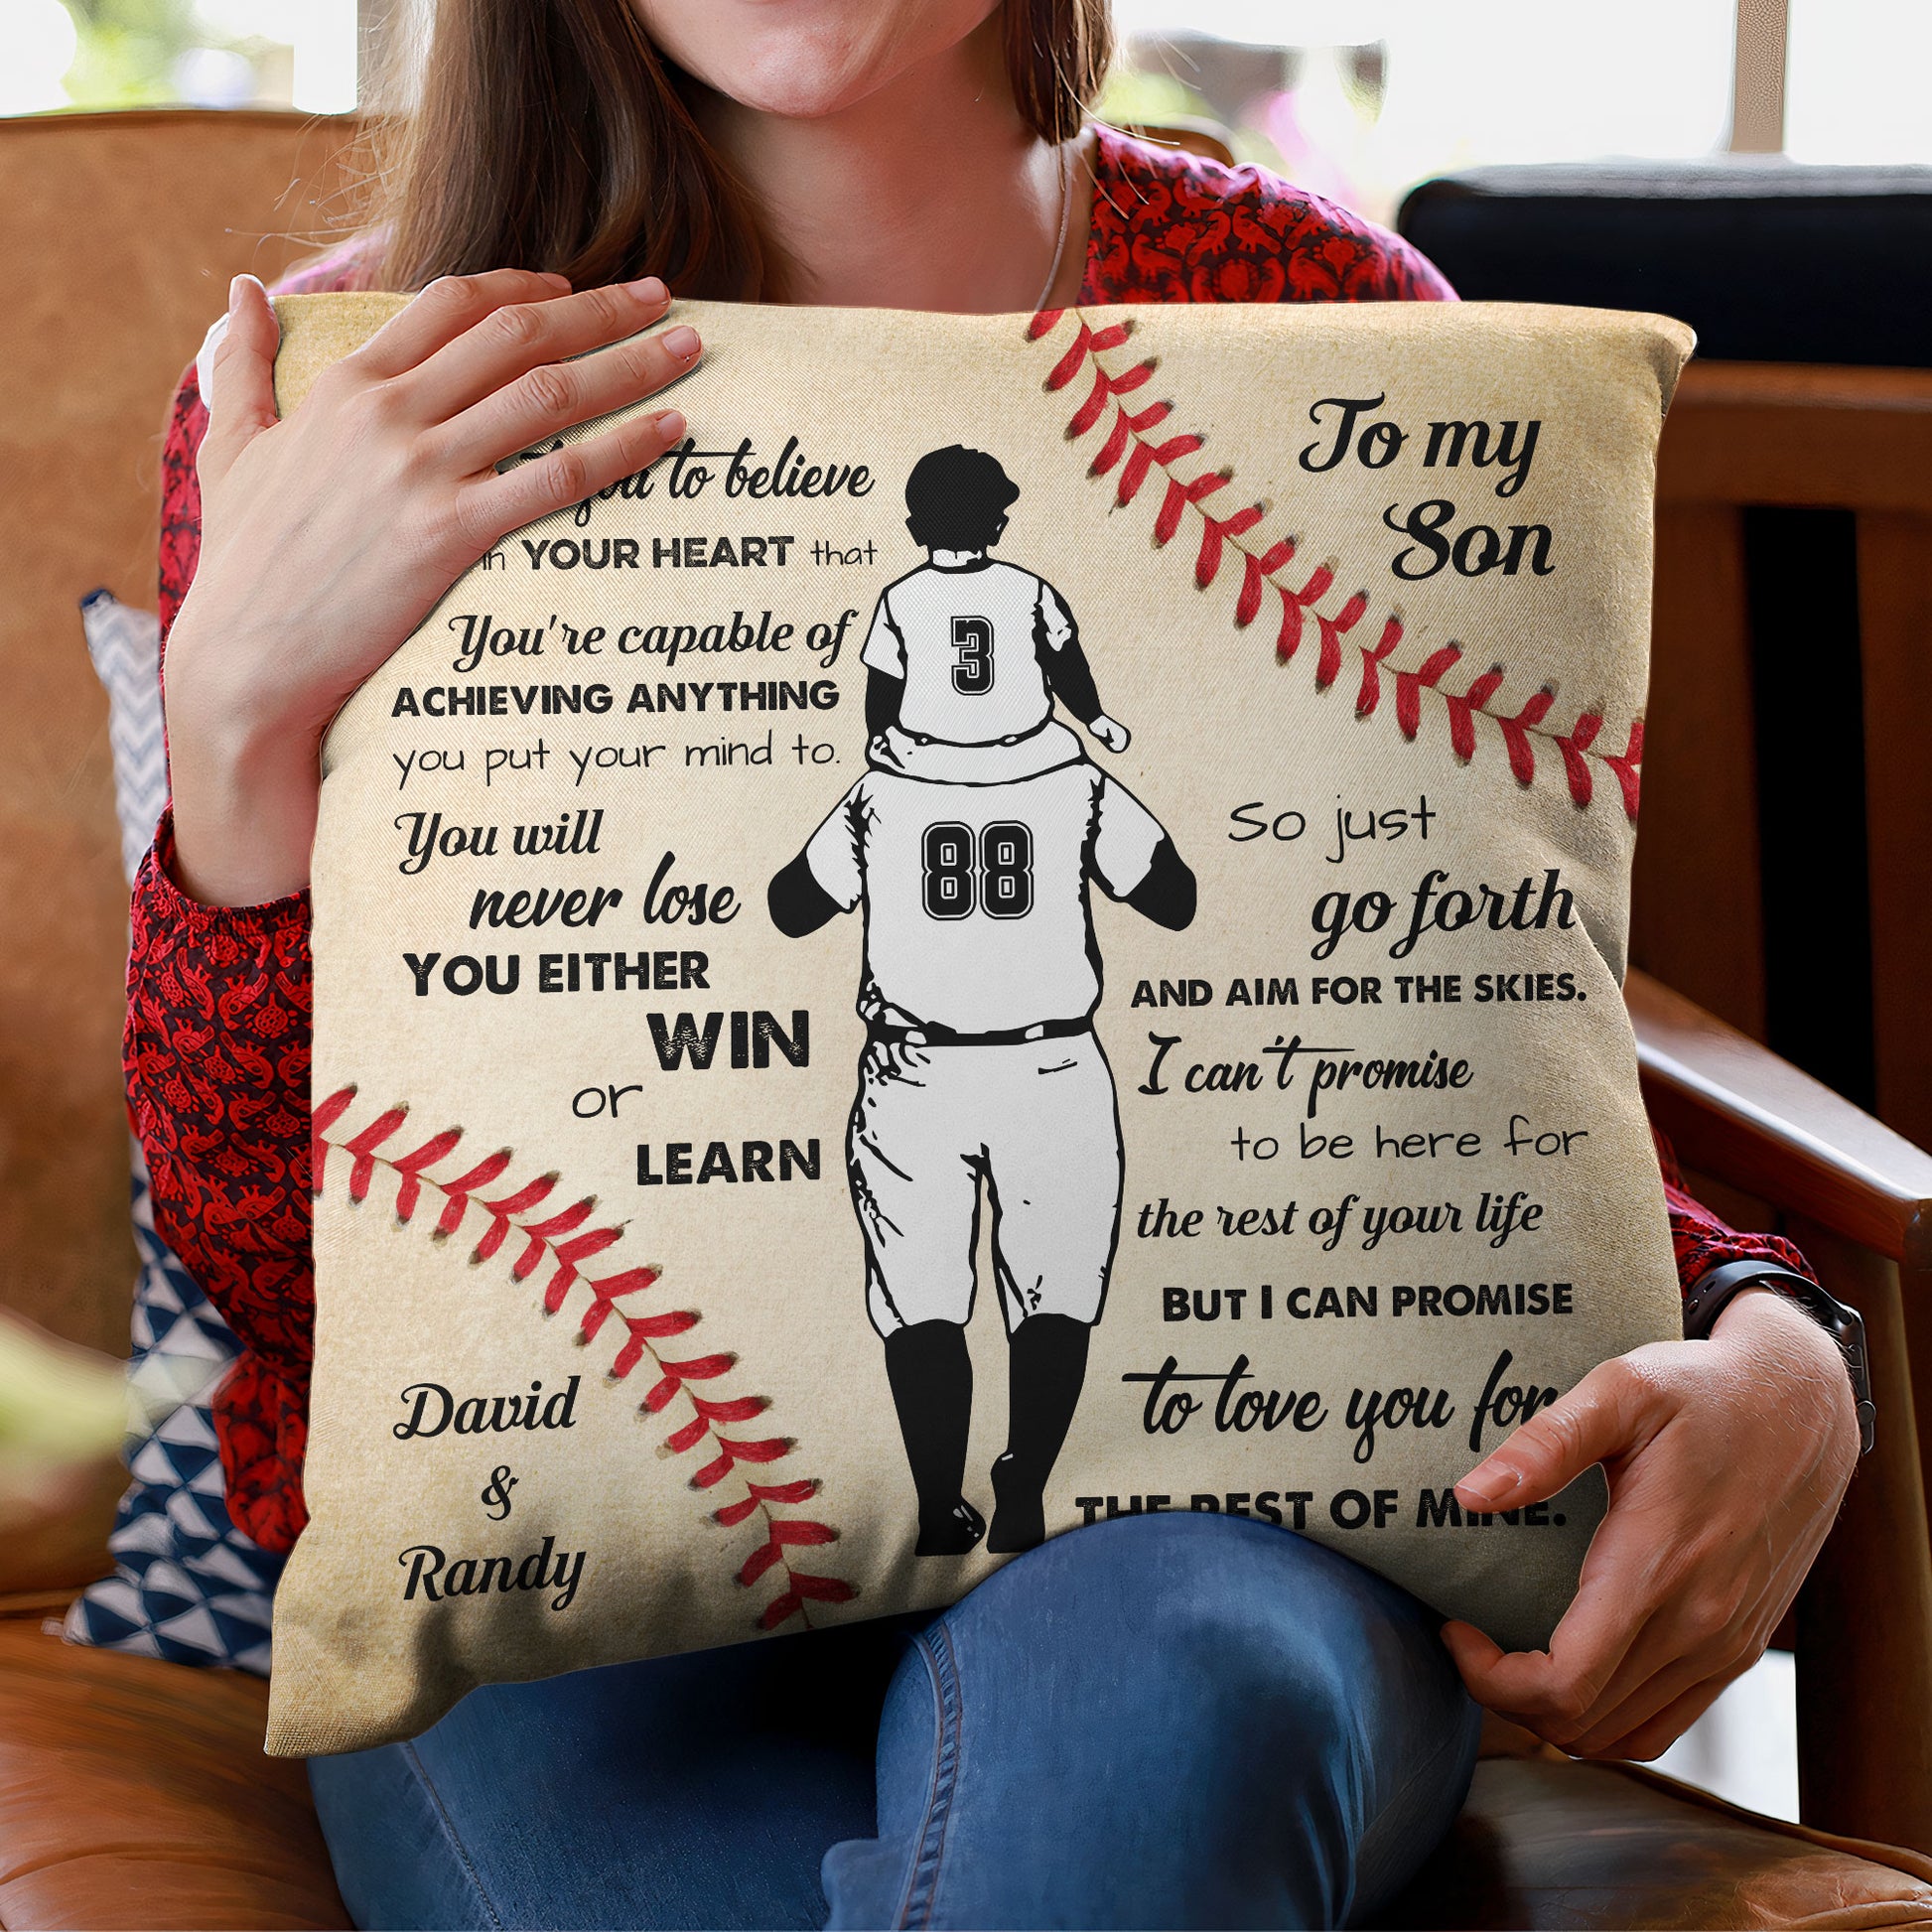 I Love You For The Rest Of My Life, Family Custom Pillow, Gift For Your Sons-Macorner